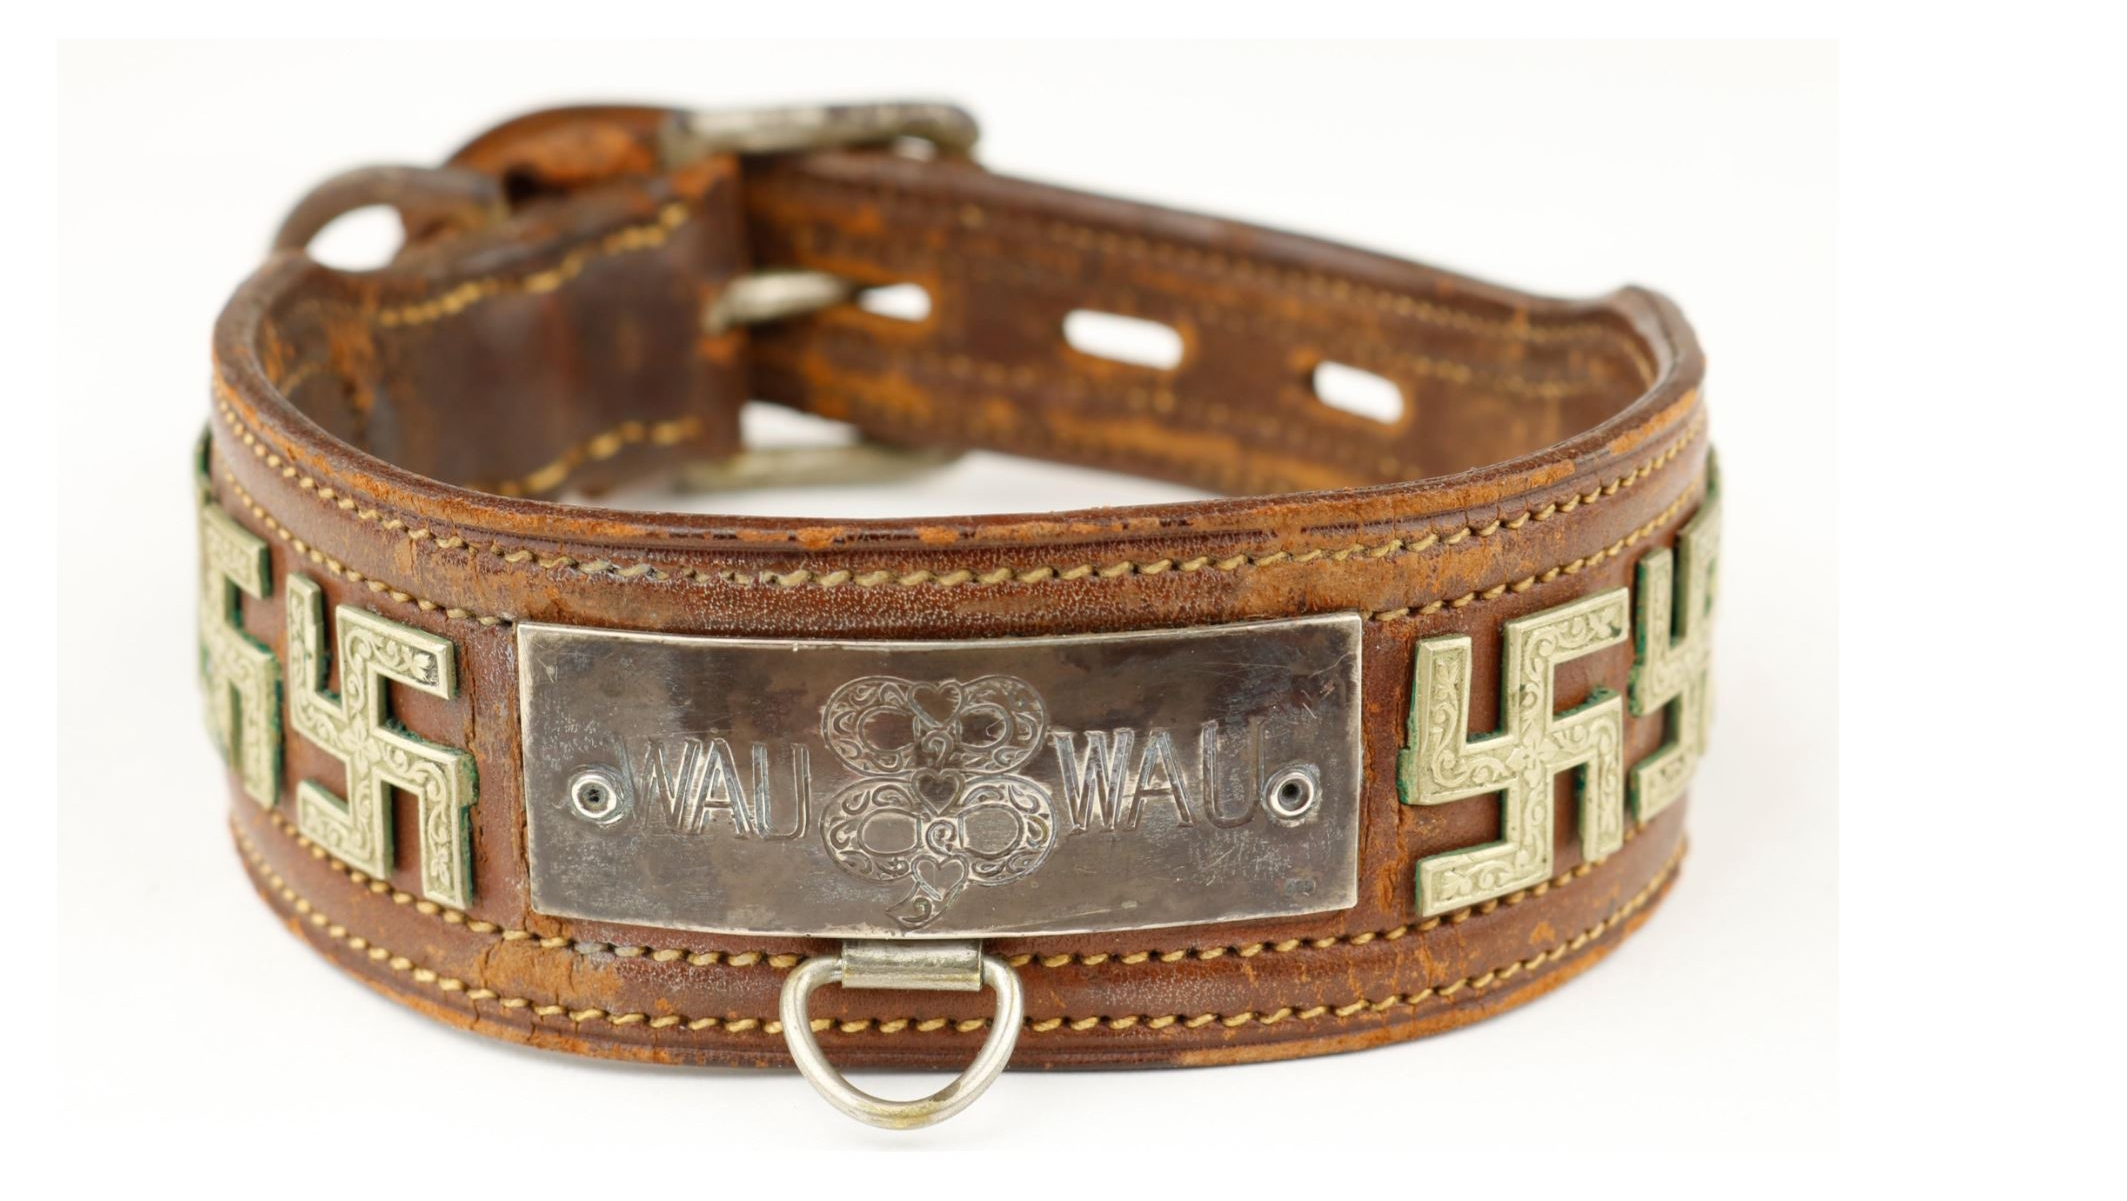 Maryland auction house defends sale of Hitler items and Eva Braun’s swastika-studded dog collar